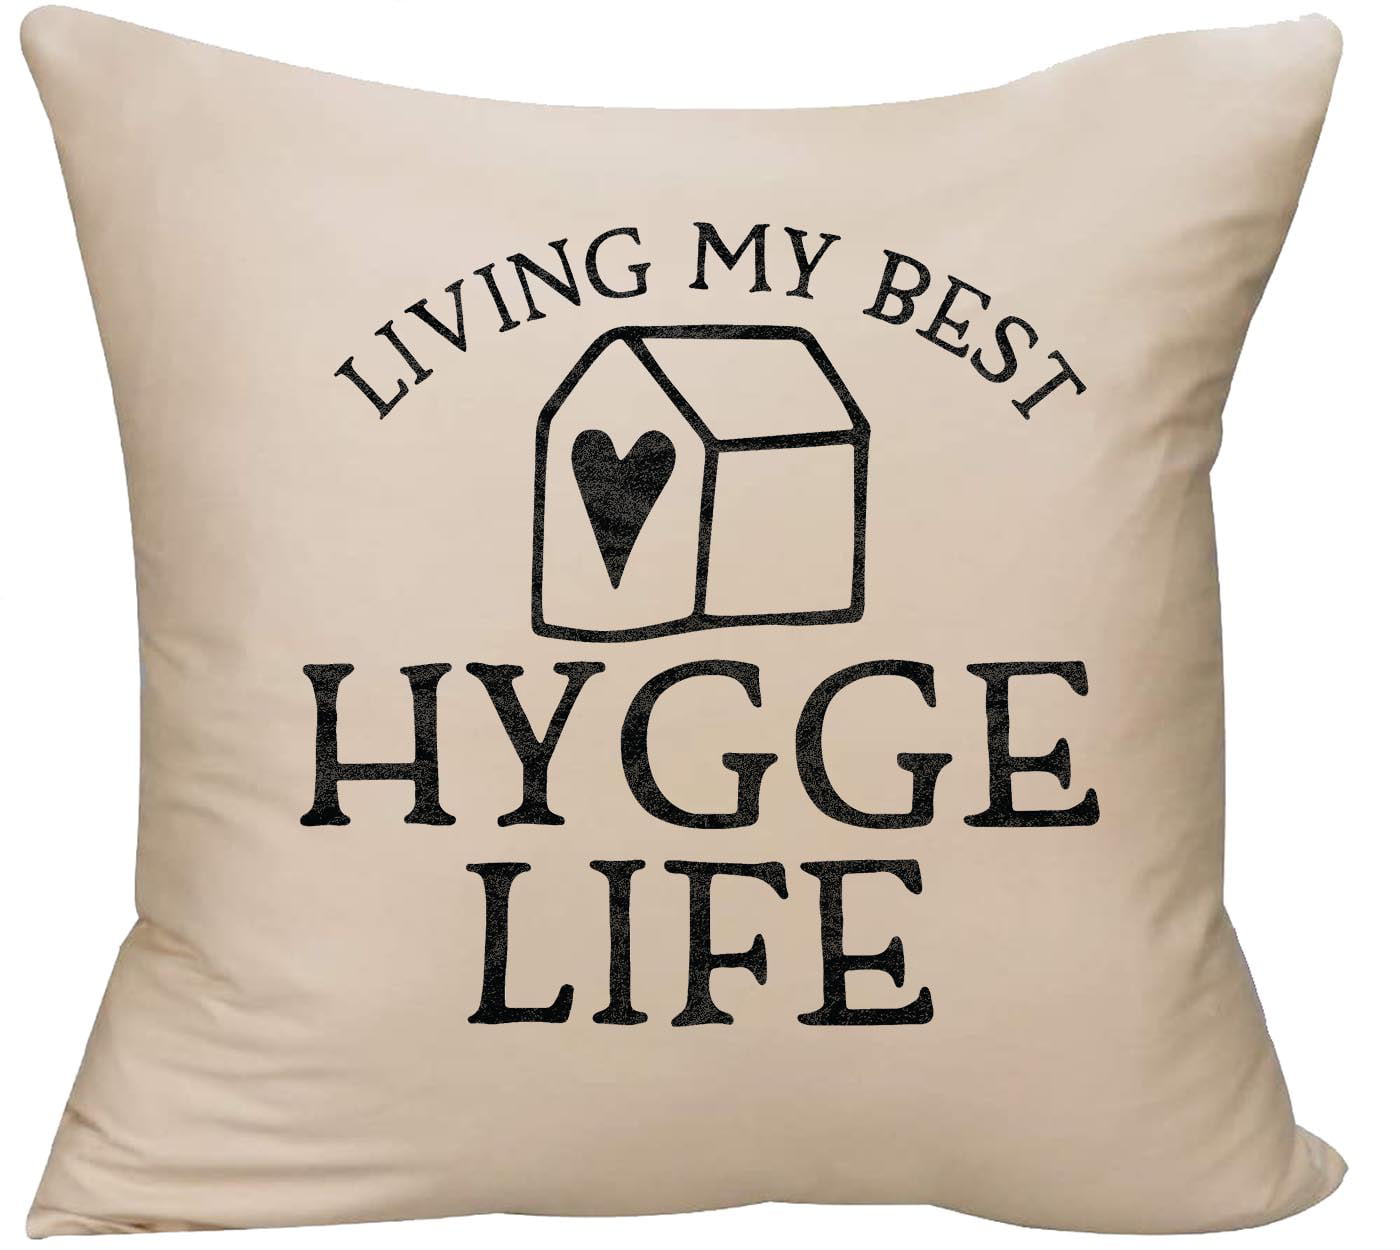 18x18 Cozy Living At Home Decoration Family is Where Life Begins and Love Never Ends-Quote Throw Pillow Multicolor 